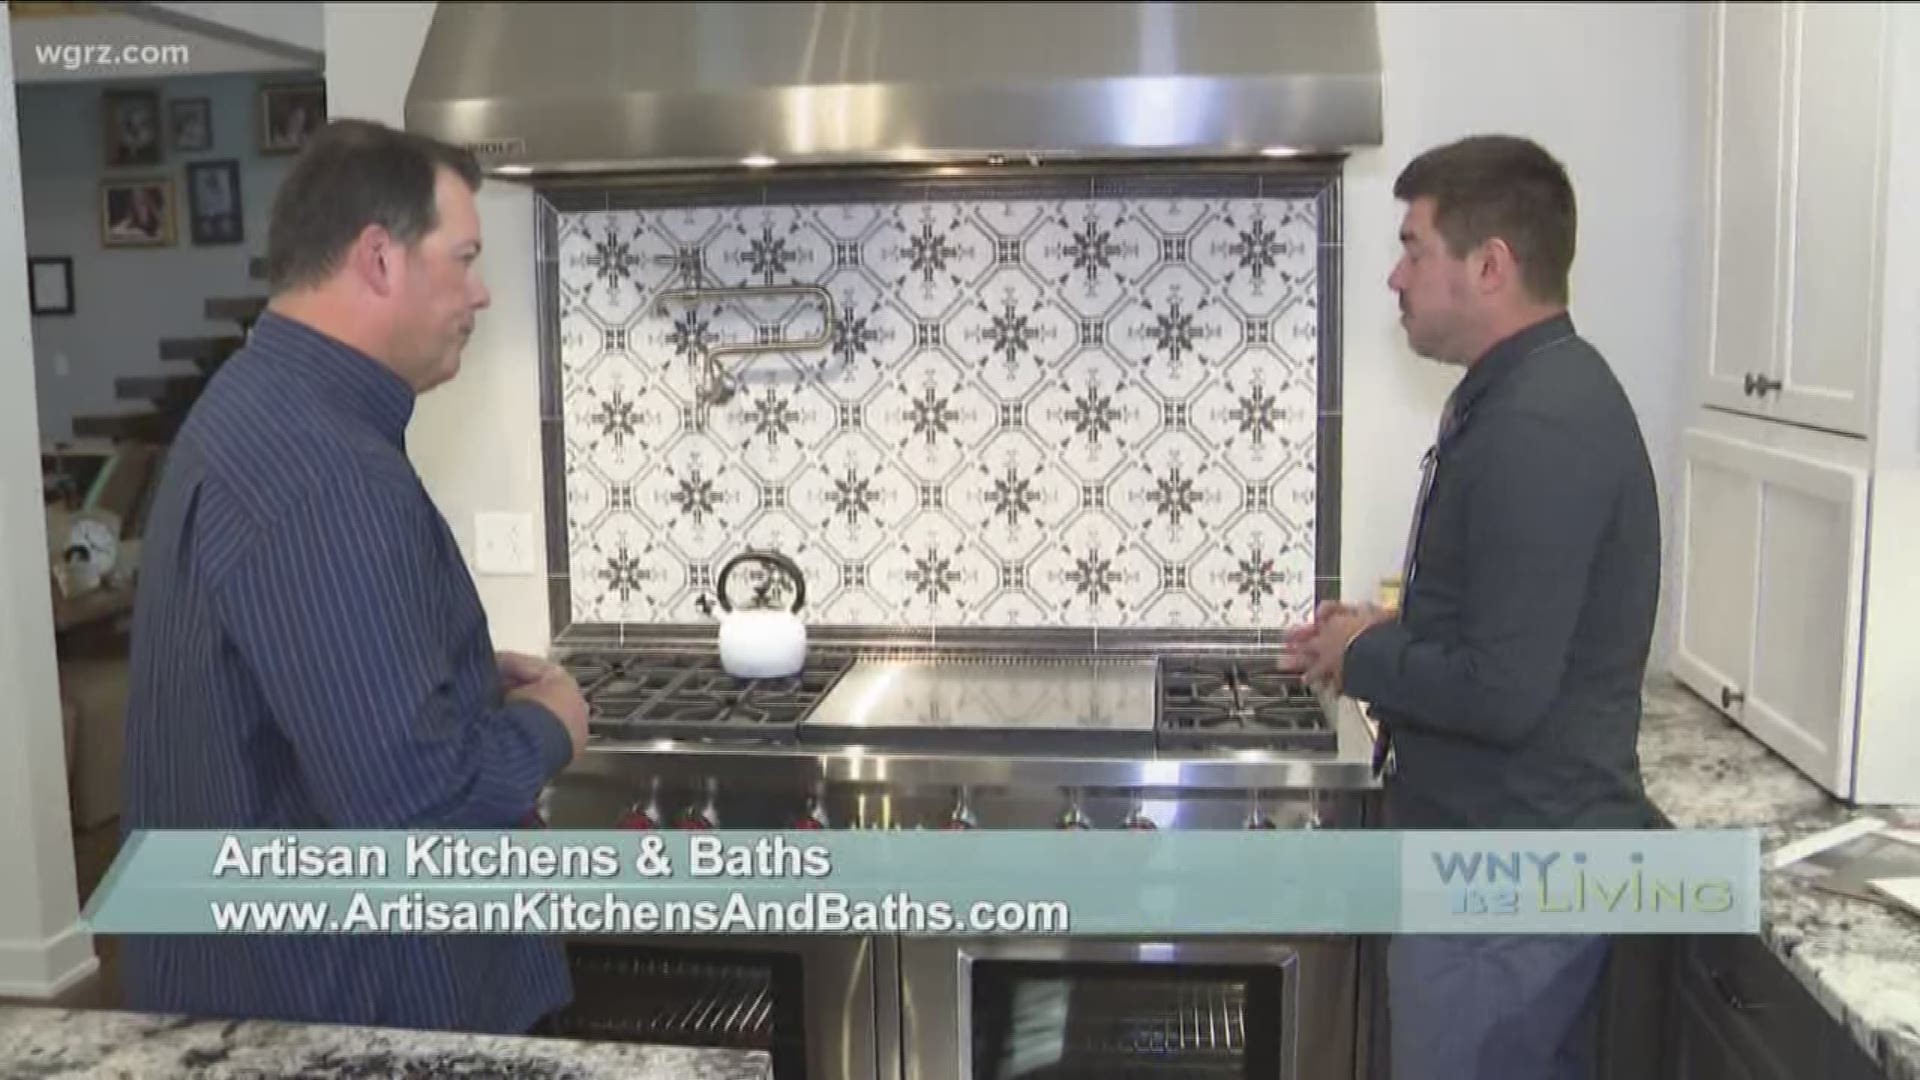 WNY Living - November 9 - Artisan Kitchens and Baths (THIS VIDEO IS SPONSORED BY ARTISAN KITCHENS AND BATHS)